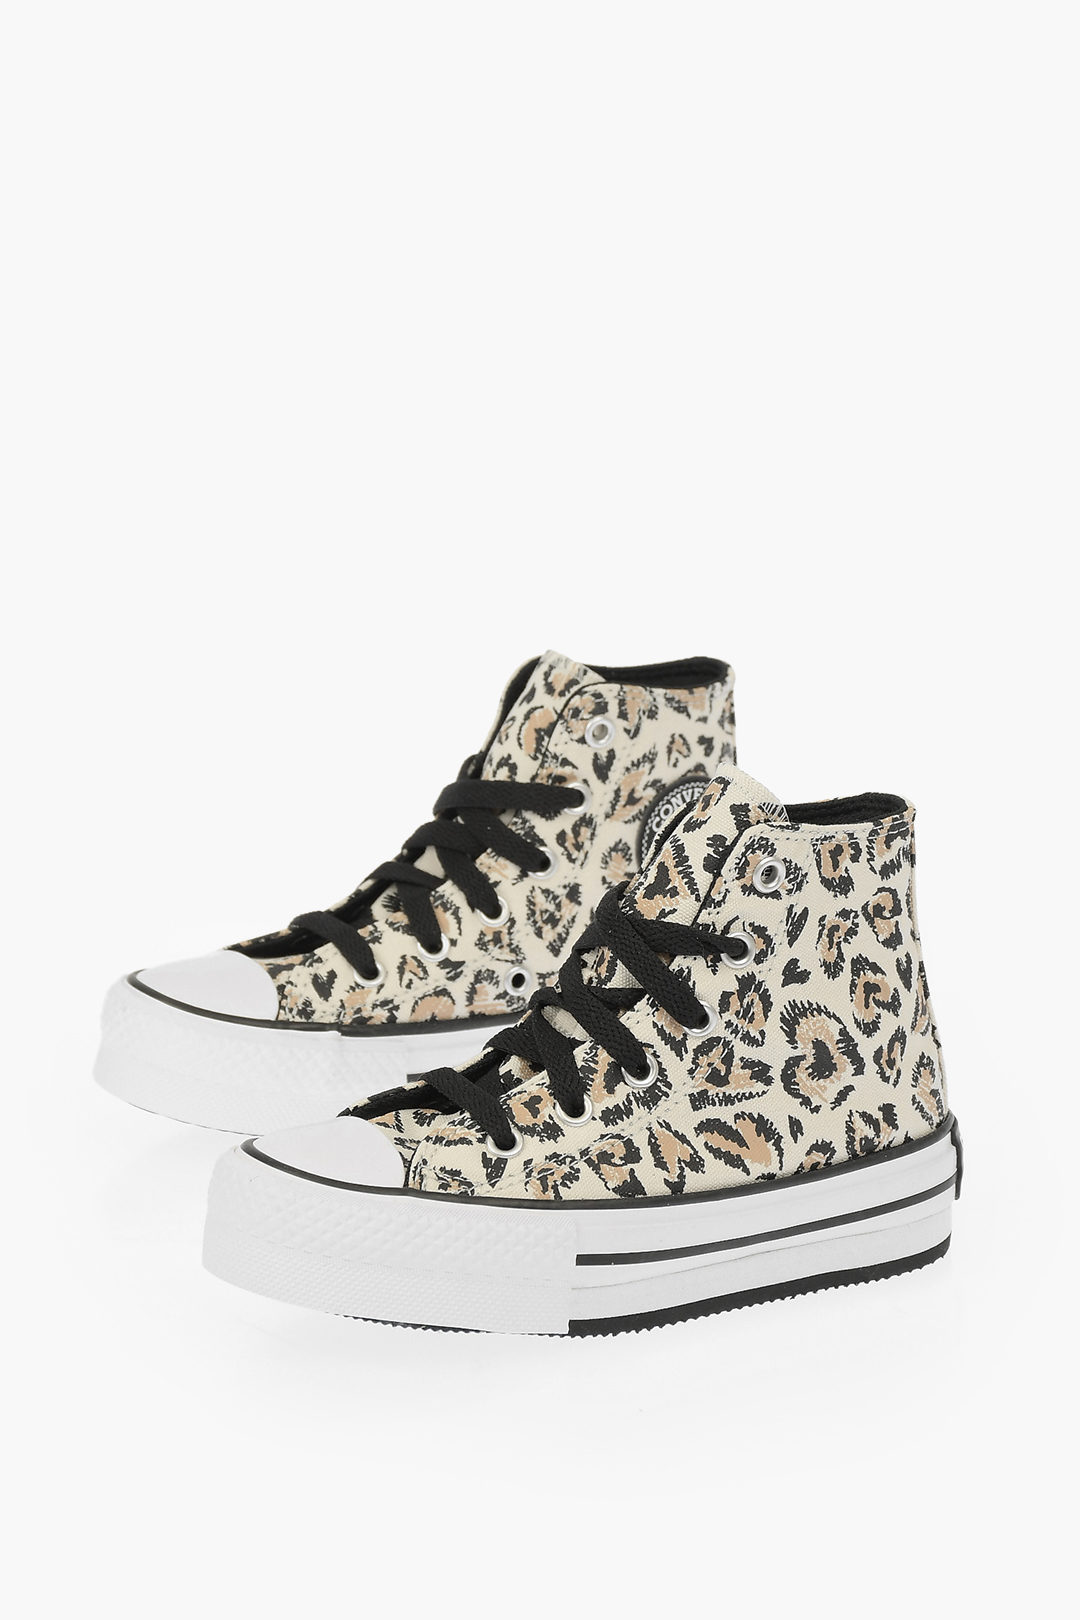 eiwit paar Minister Converse KIDS CHUCK TAYLOR ALL STAR Printed Sneakers girls - Glamood Outlet